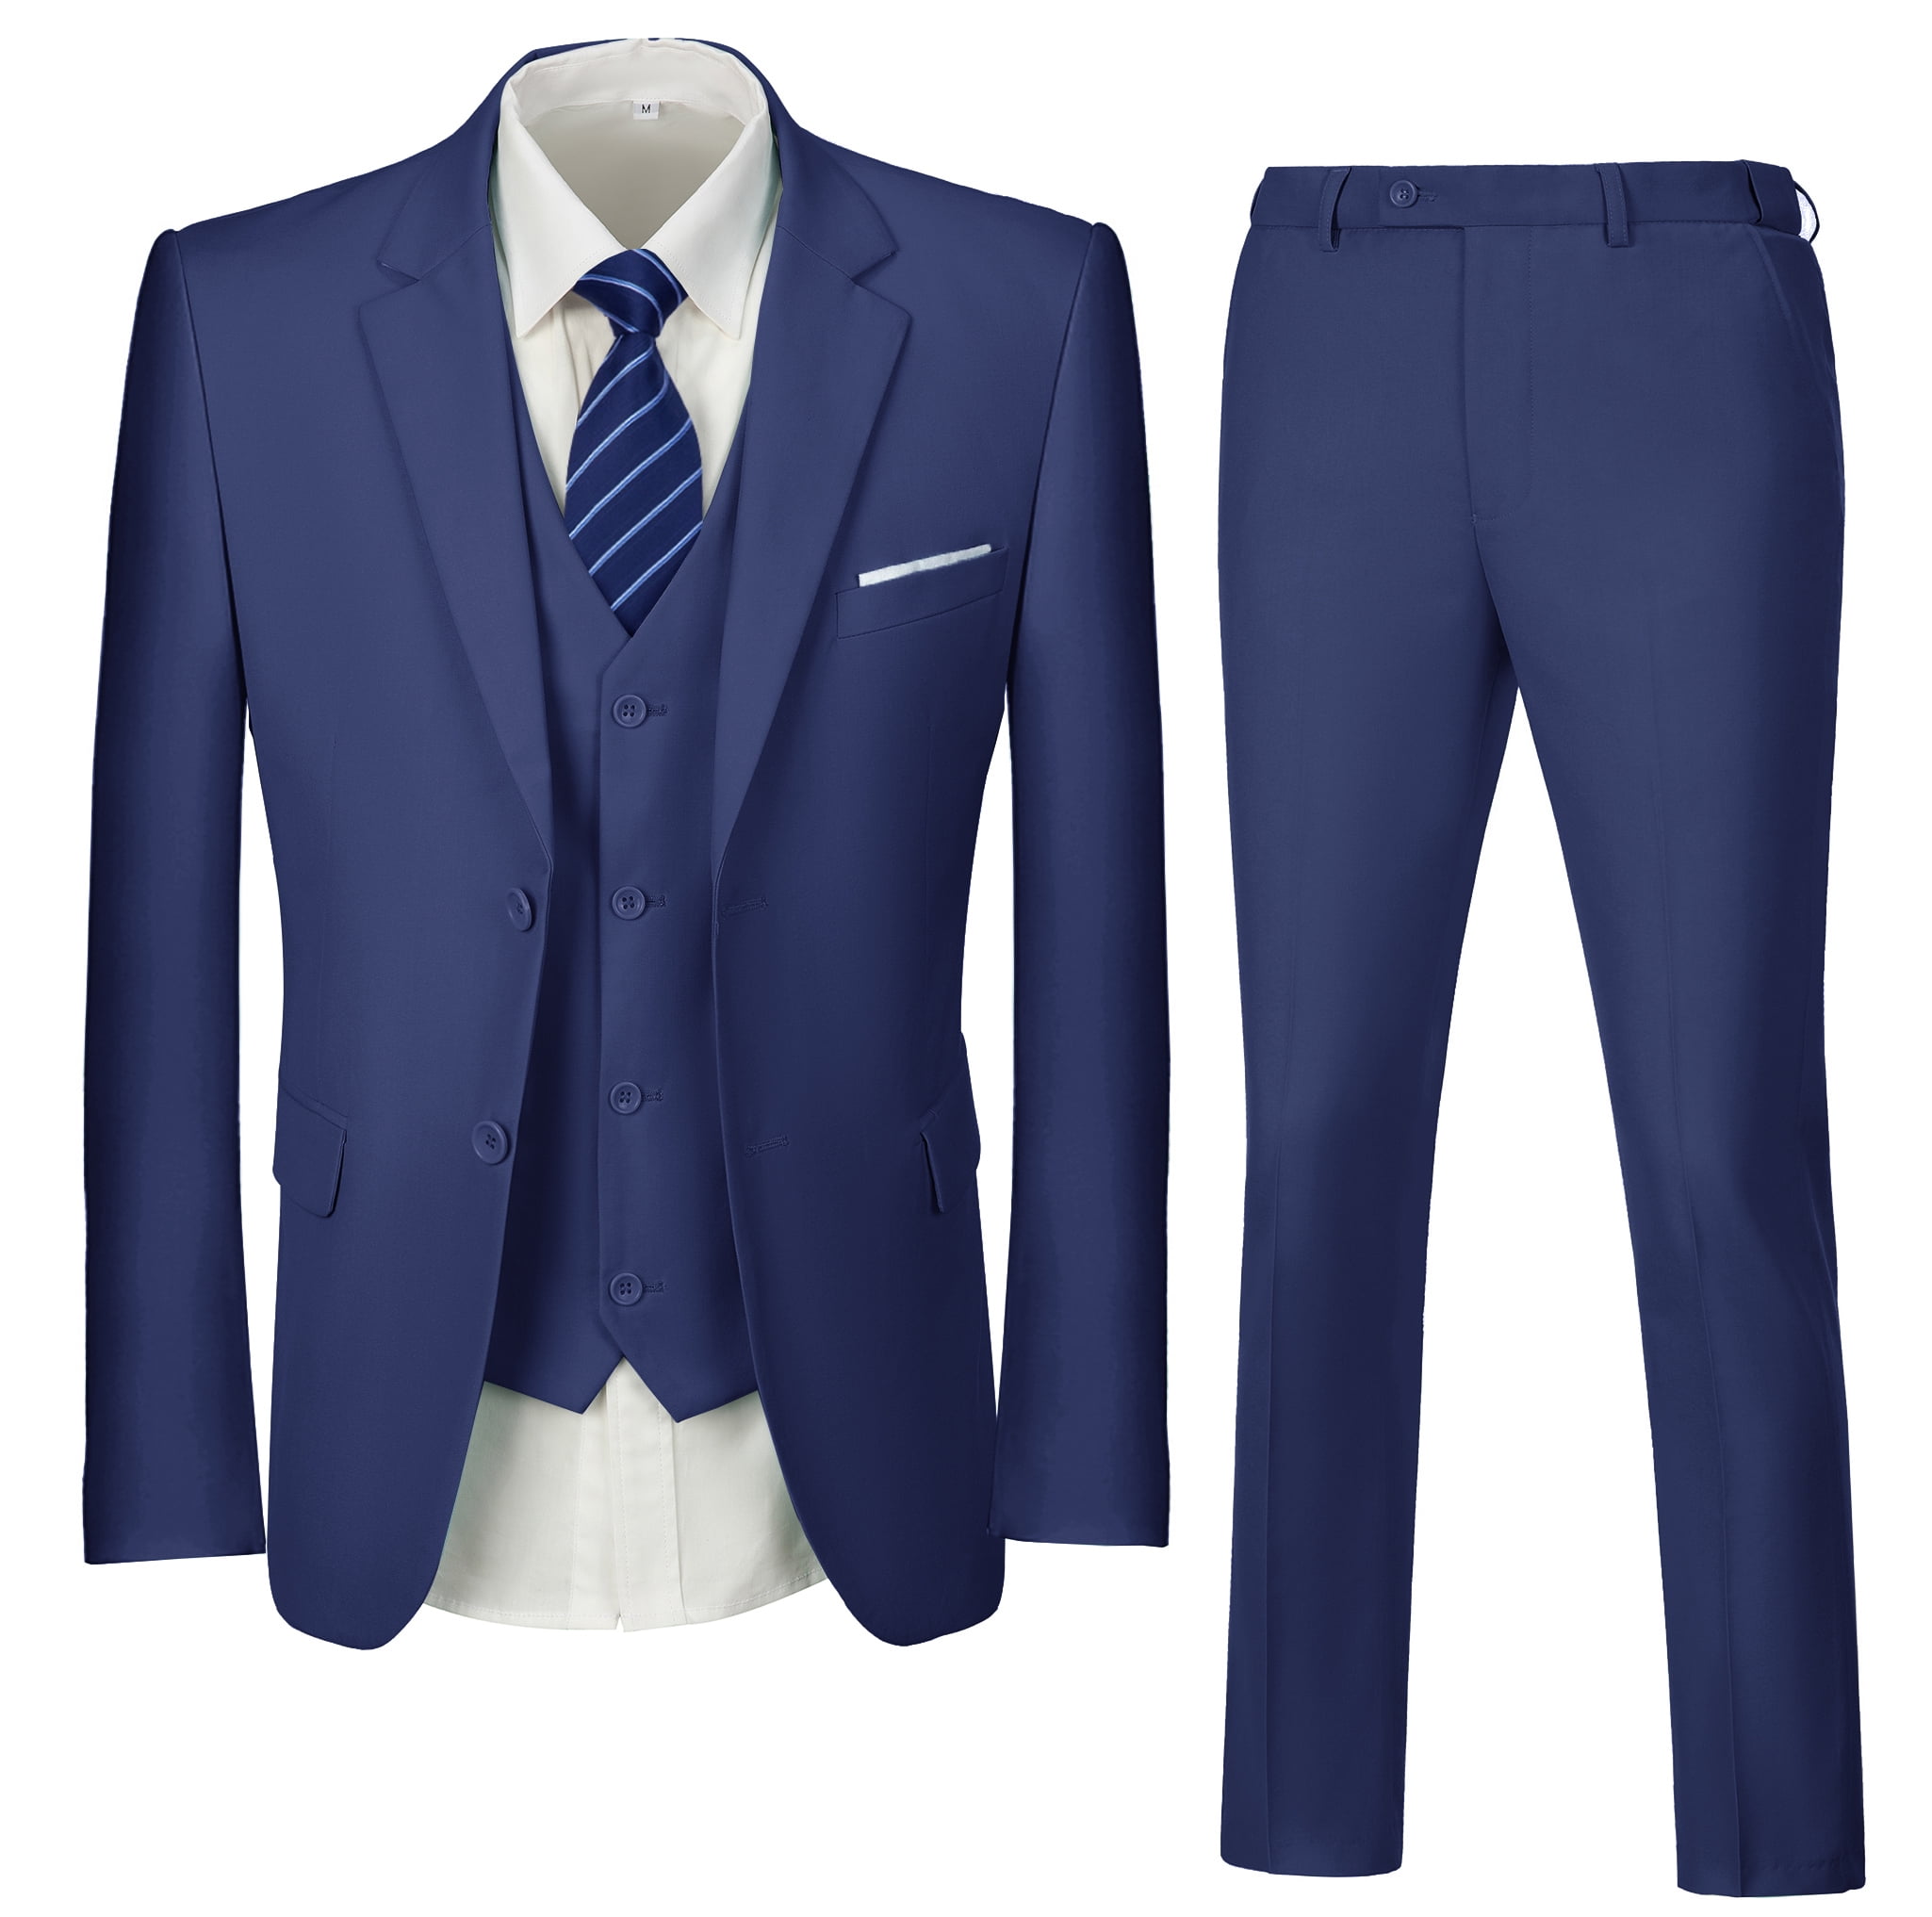 Buy Royal Blue Formal Pants Suit With Single Breasted Blazer and Straight  Pants High Waist, Blue Blazer Trouser Suit for Women, Tall Women Suit  Online in India - Etsy